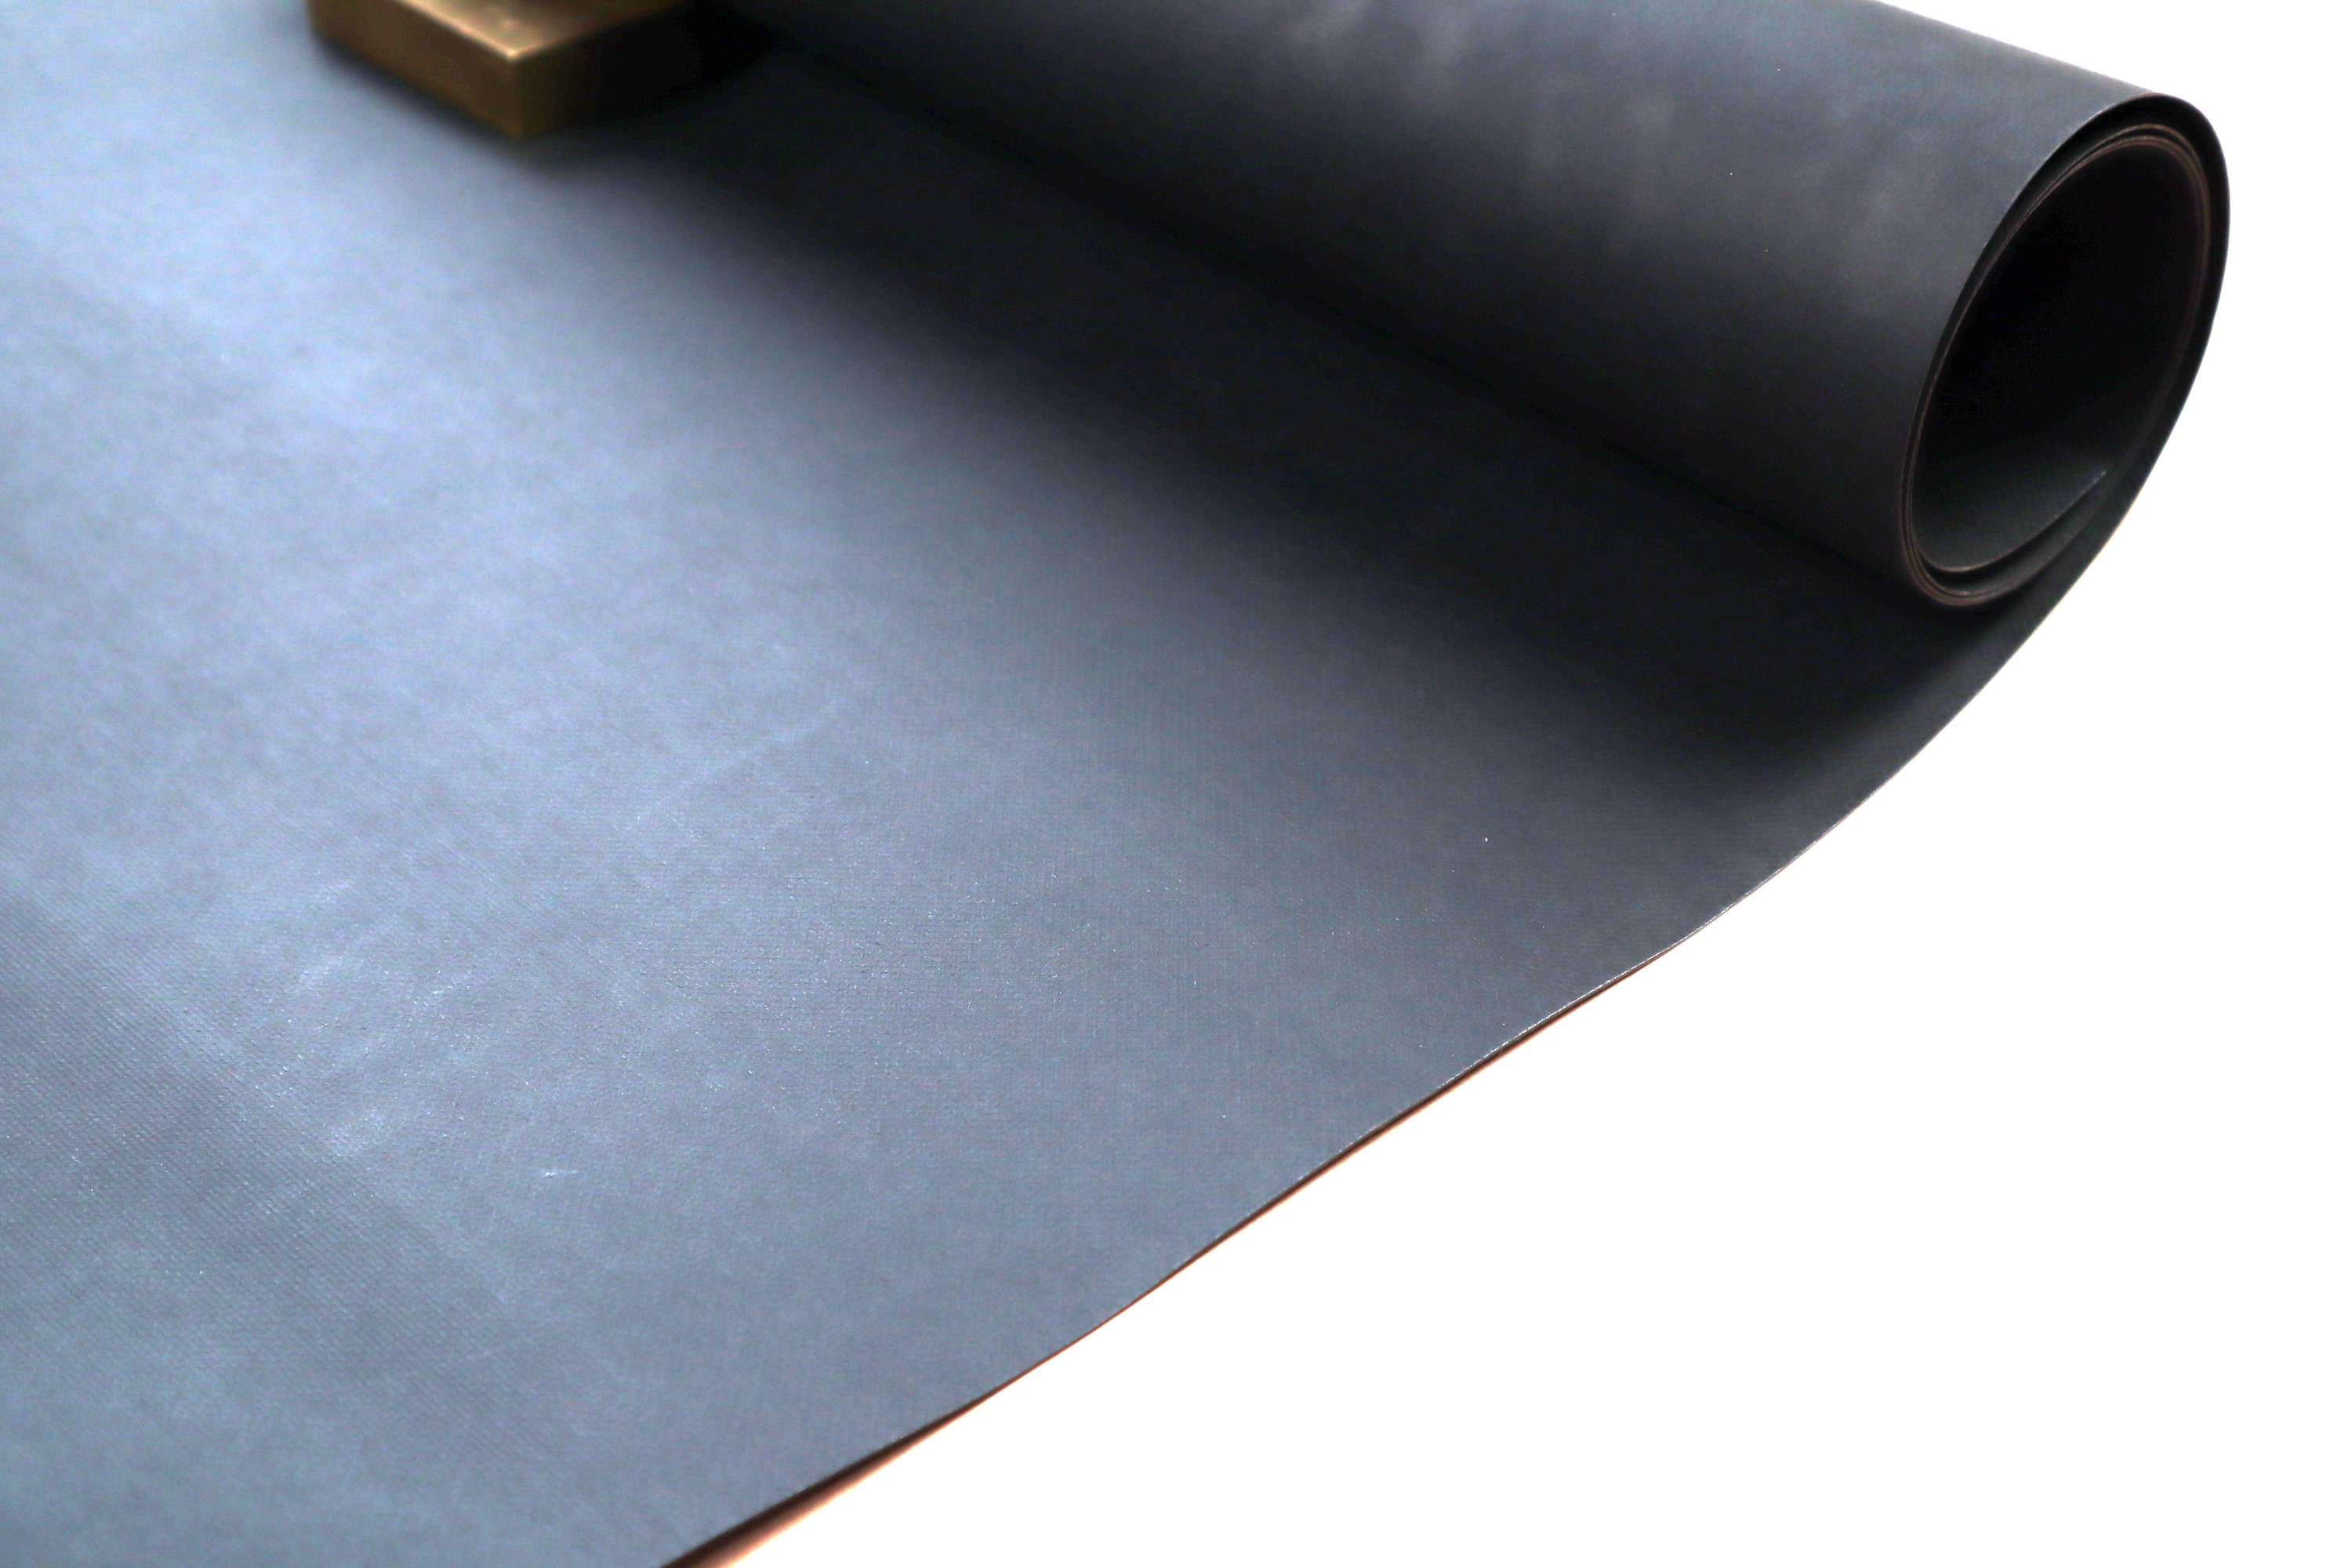 Black Nonwoven Adhesive Technical Fabric 0.1 Mm Reinforcement Leather Bag  Interlining Size 50 Cm X 150 Cm 20 X 60 About 8 Sf K1 